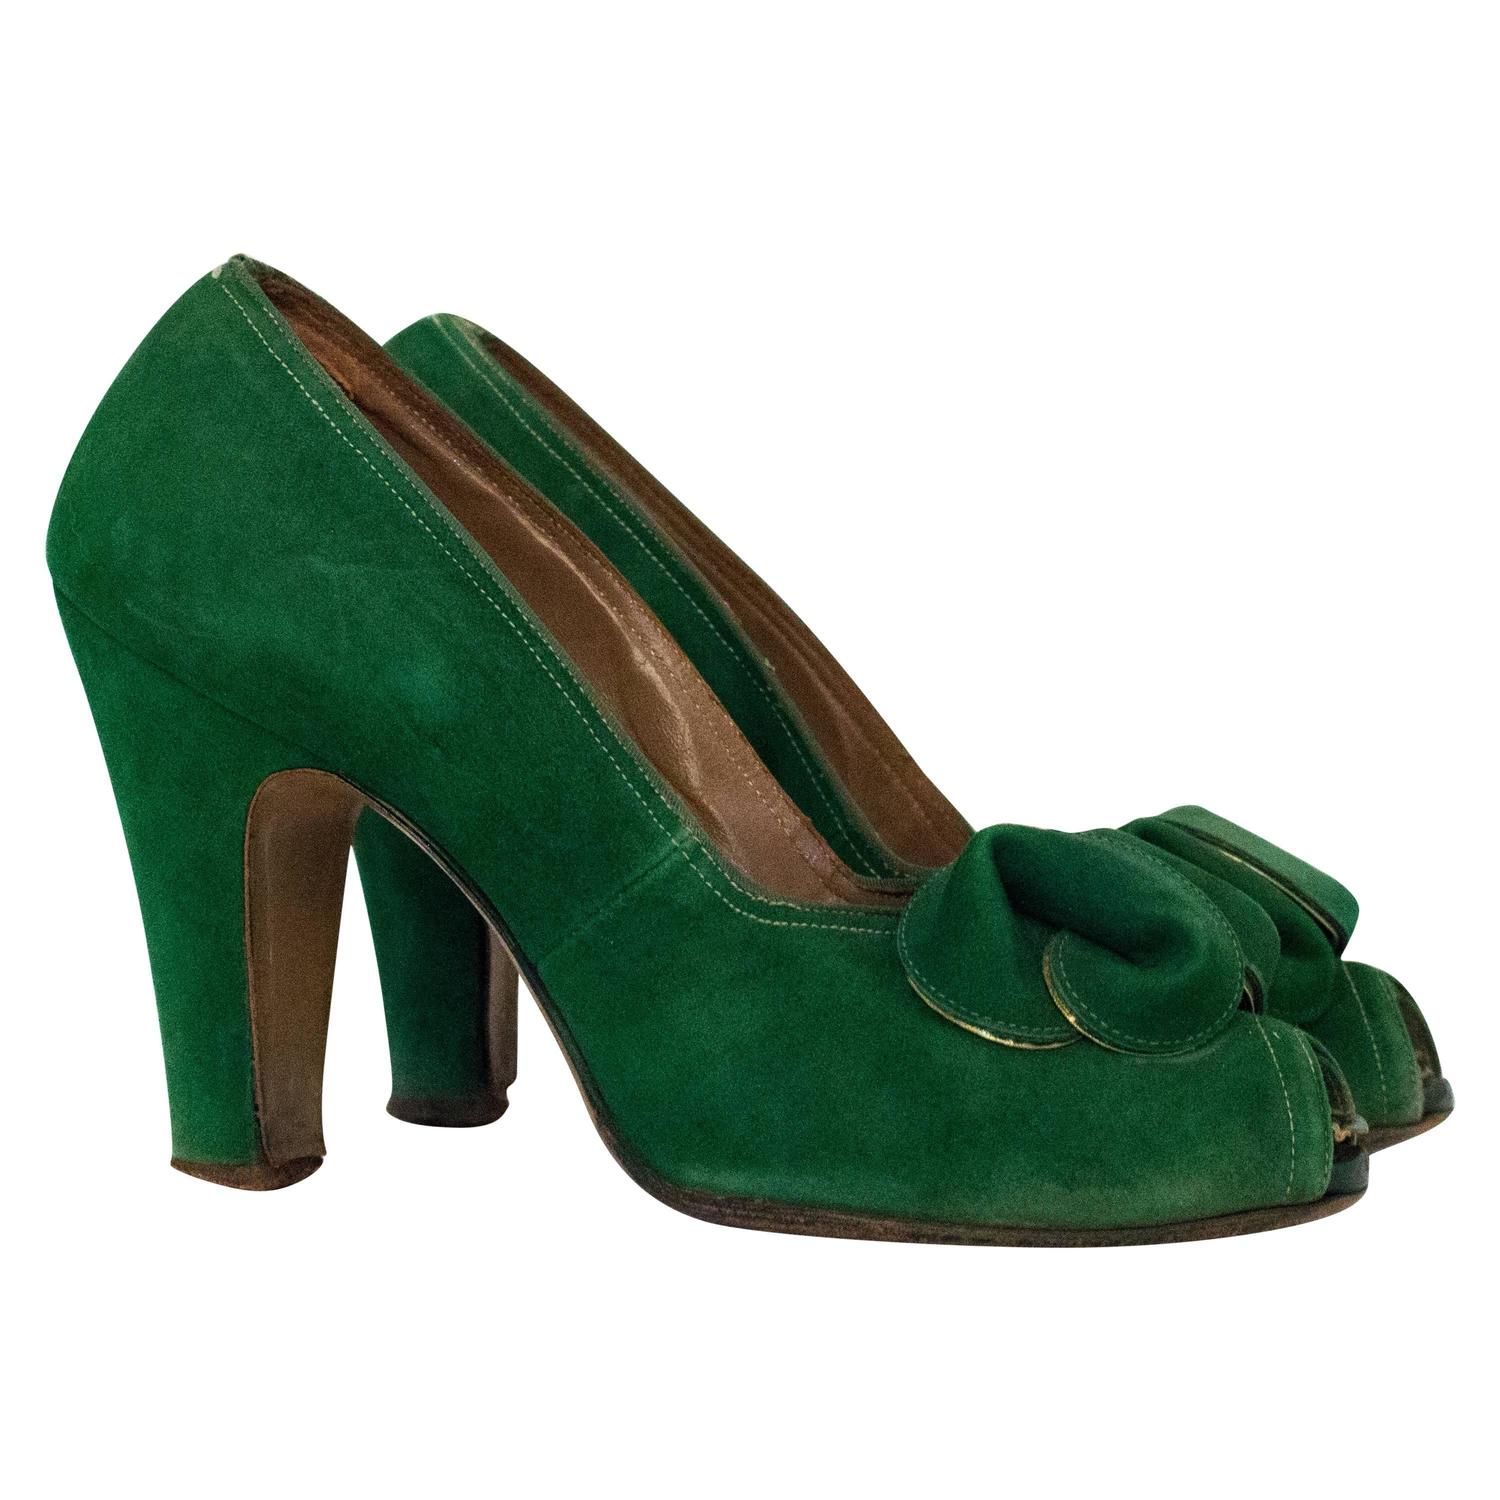 30s Paradise Shoes Green sued Heel For Sale at 1stdibs